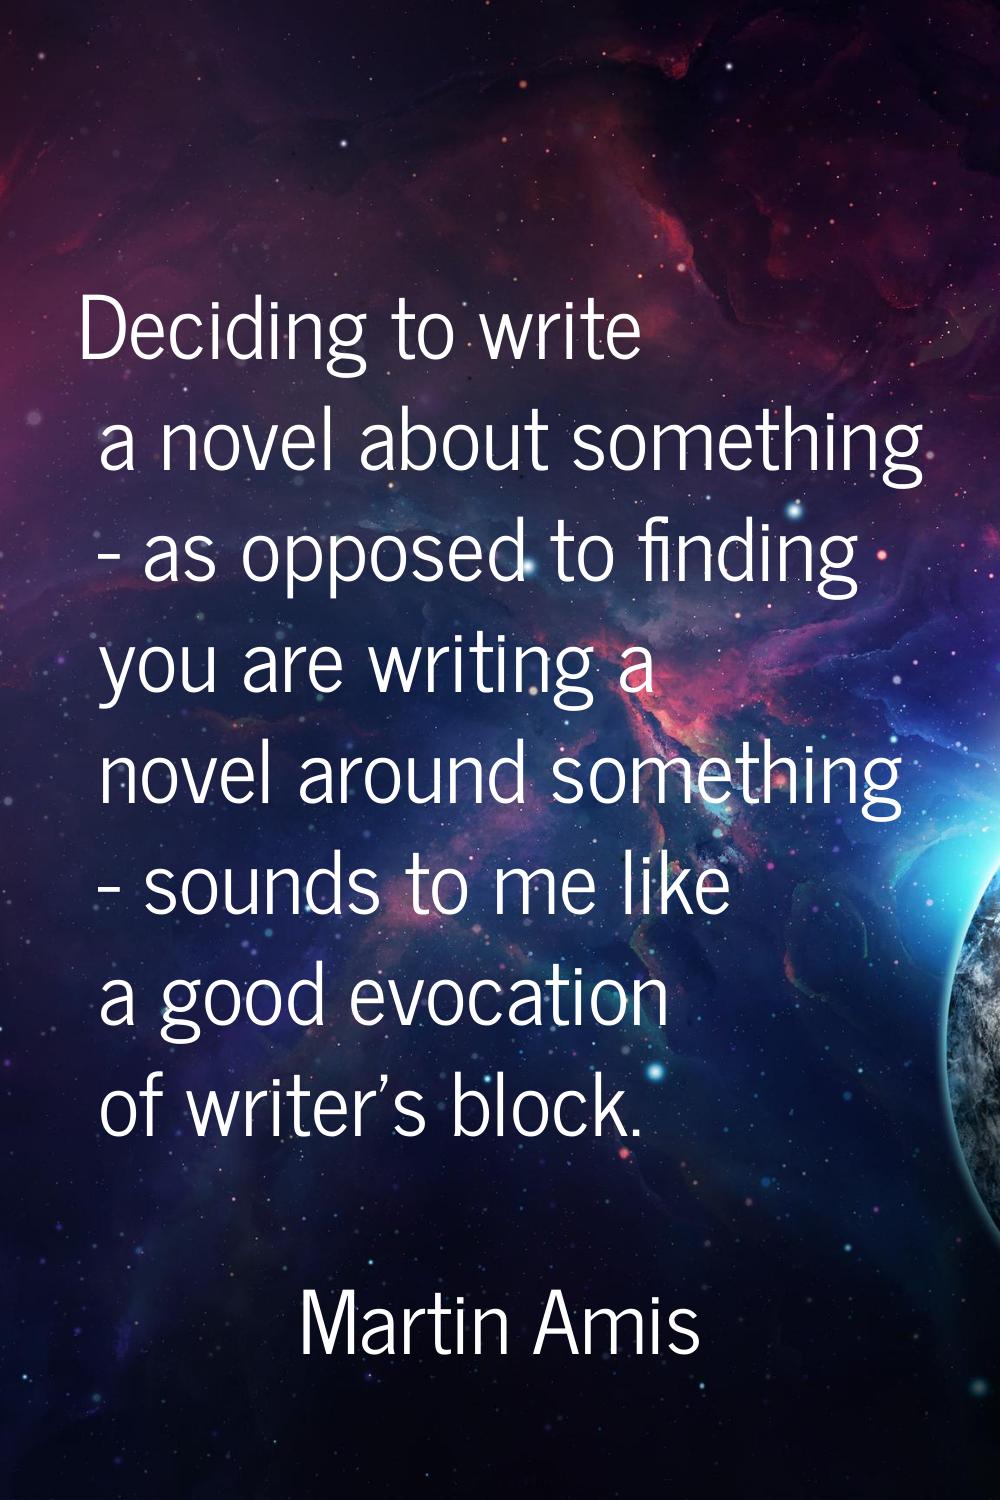 Deciding to write a novel about something - as opposed to finding you are writing a novel around so